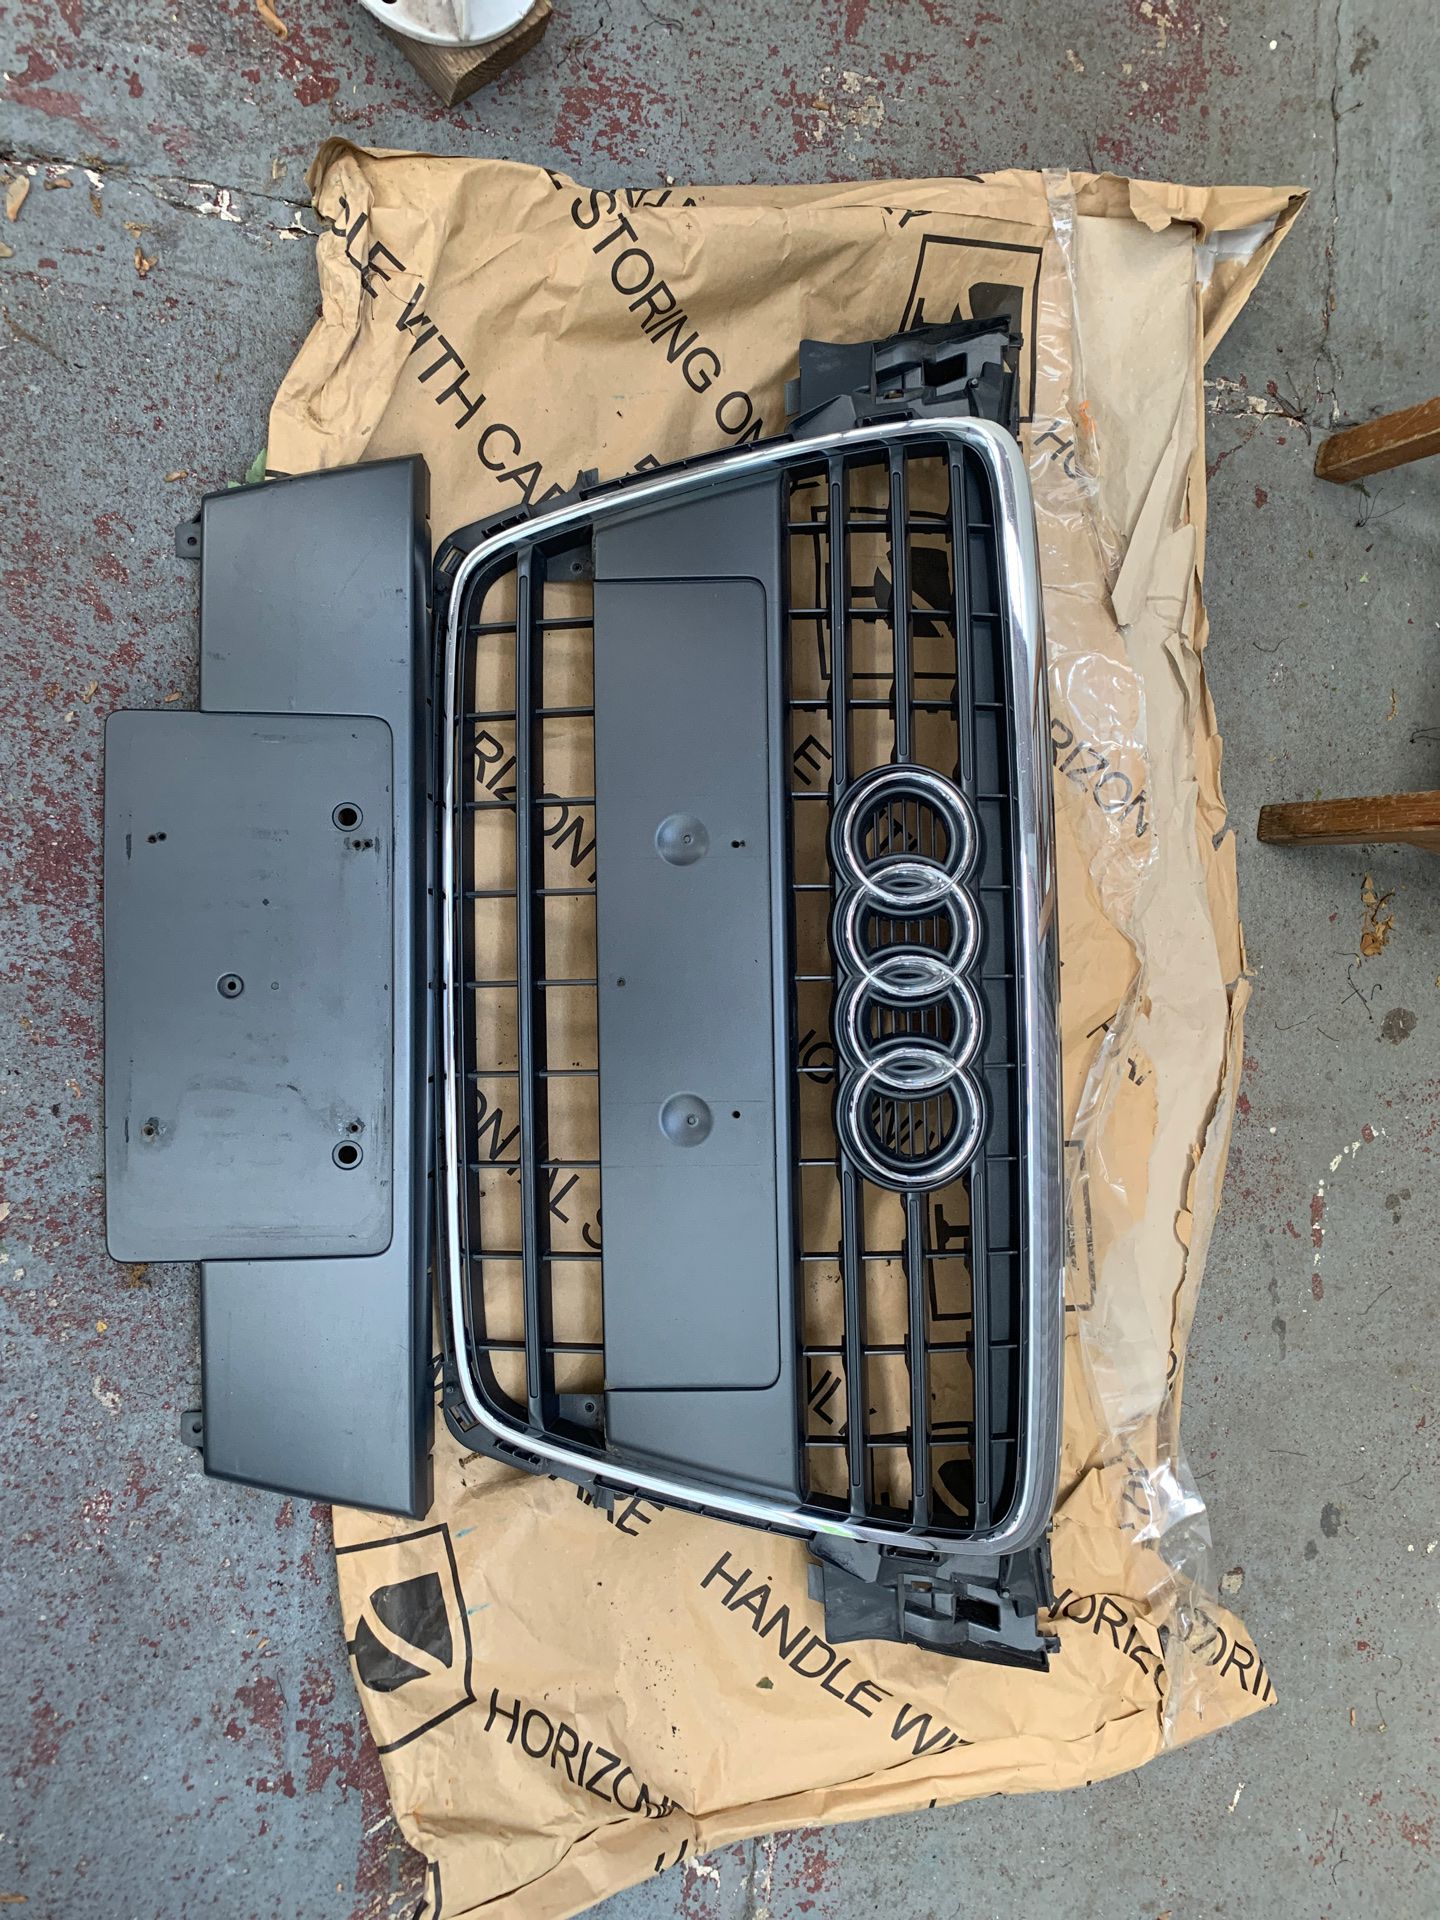 Audi A4 front grill